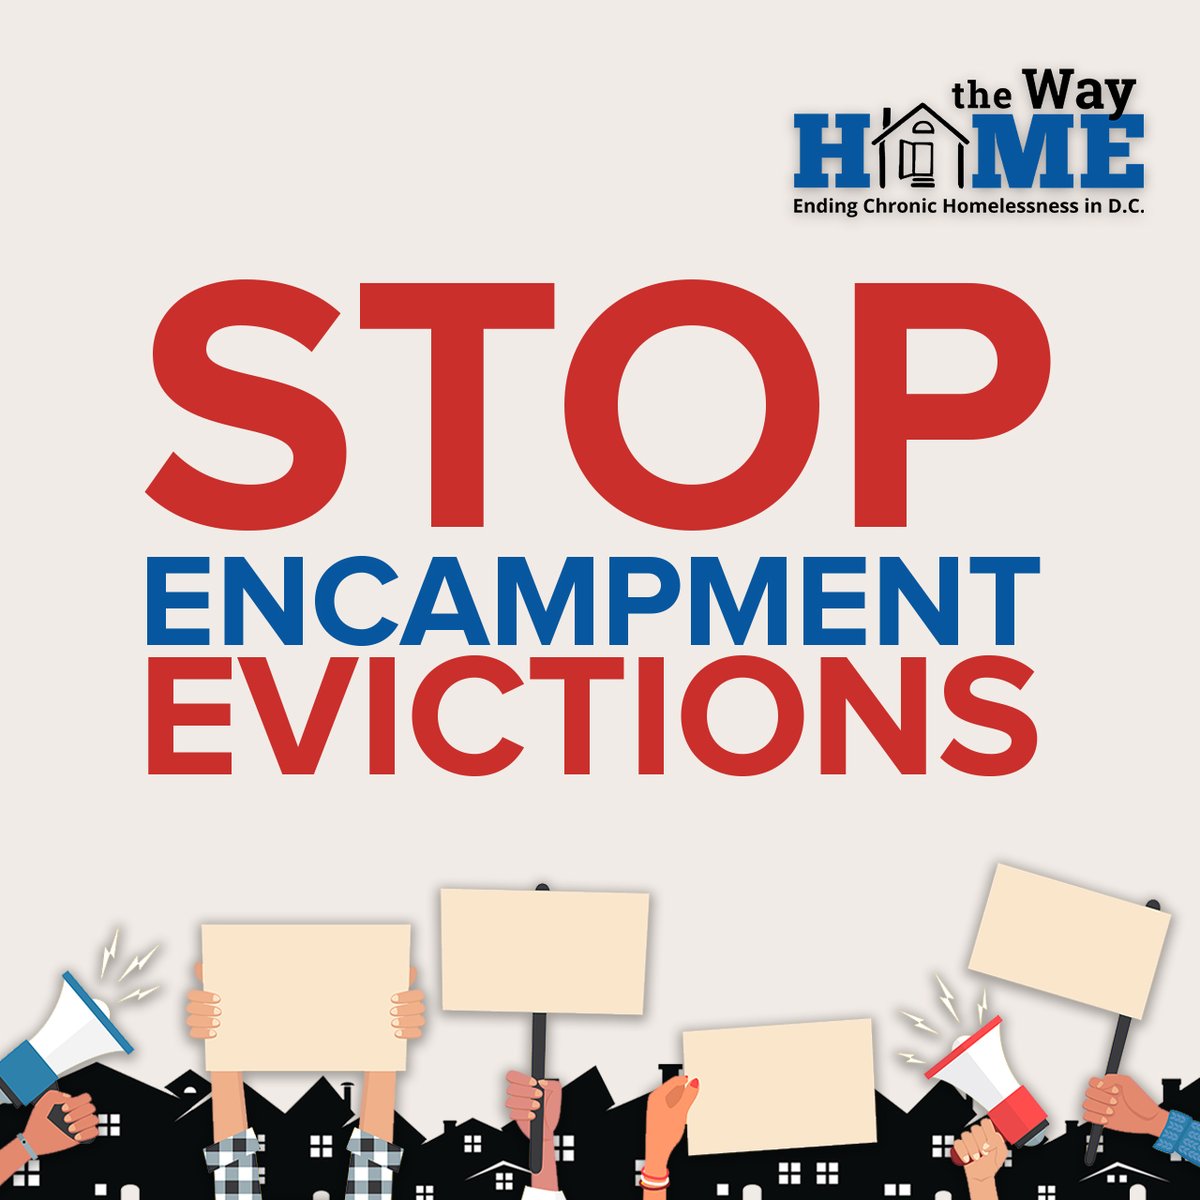 📢 TAKE ACTION 📢 The National Park Service and the Bowser administration are slated to evict and permanently close five encampment sites in Foggy Bottom, displacing up to 70 people. Please join us in urging policymakers to halt this evictions today: bit.ly/3y6MQuG